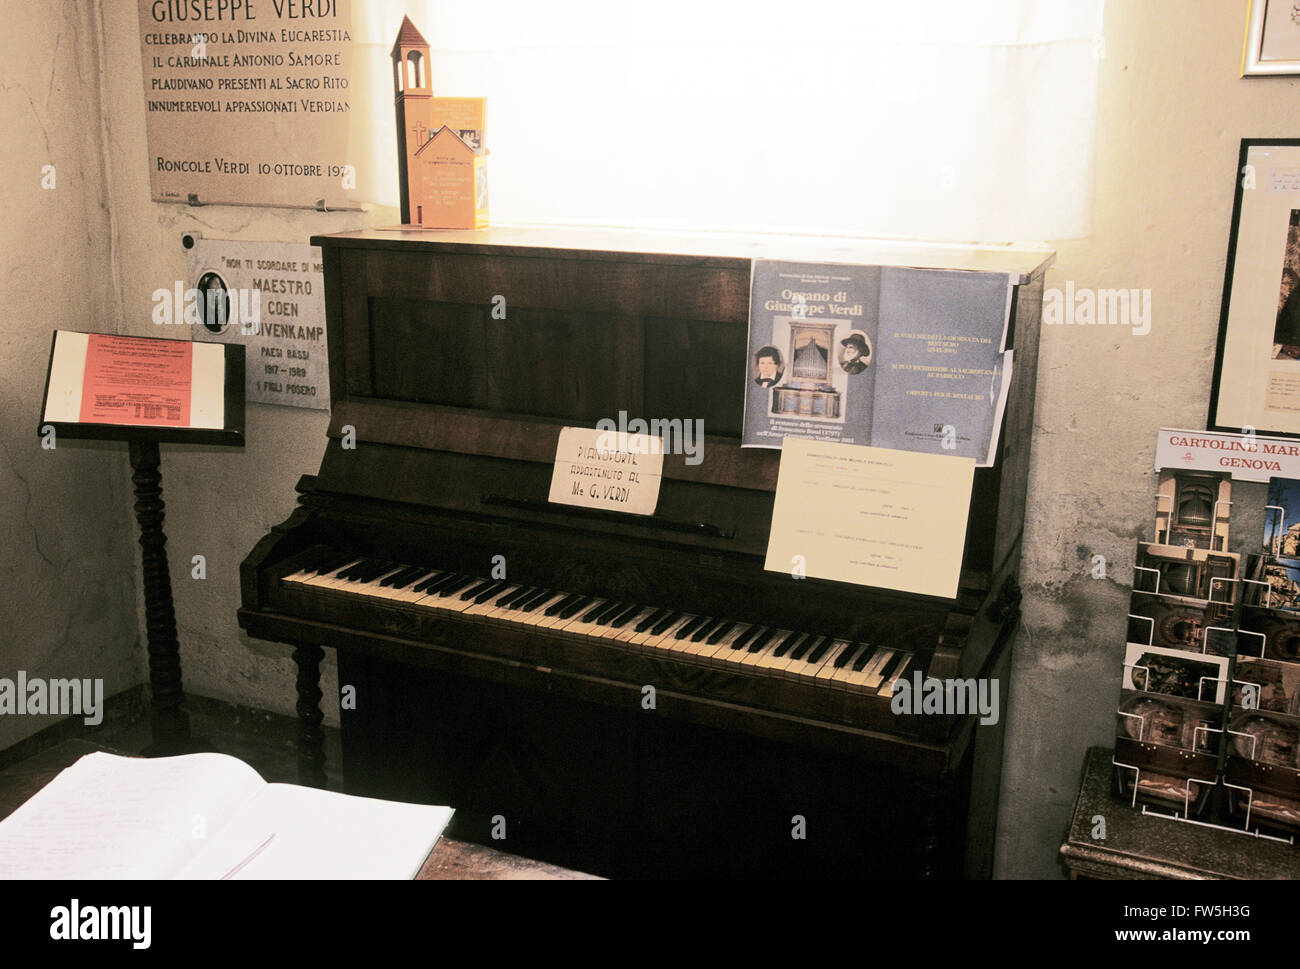 vestry with Verdi’s first upright piano. plaque to Coen Ruivenkamp, 1917-89, Netherlands maestro, in Church of S. Michele Arcangelo, Róncole, near Parma, birthplace of Italian composer Stock Photo